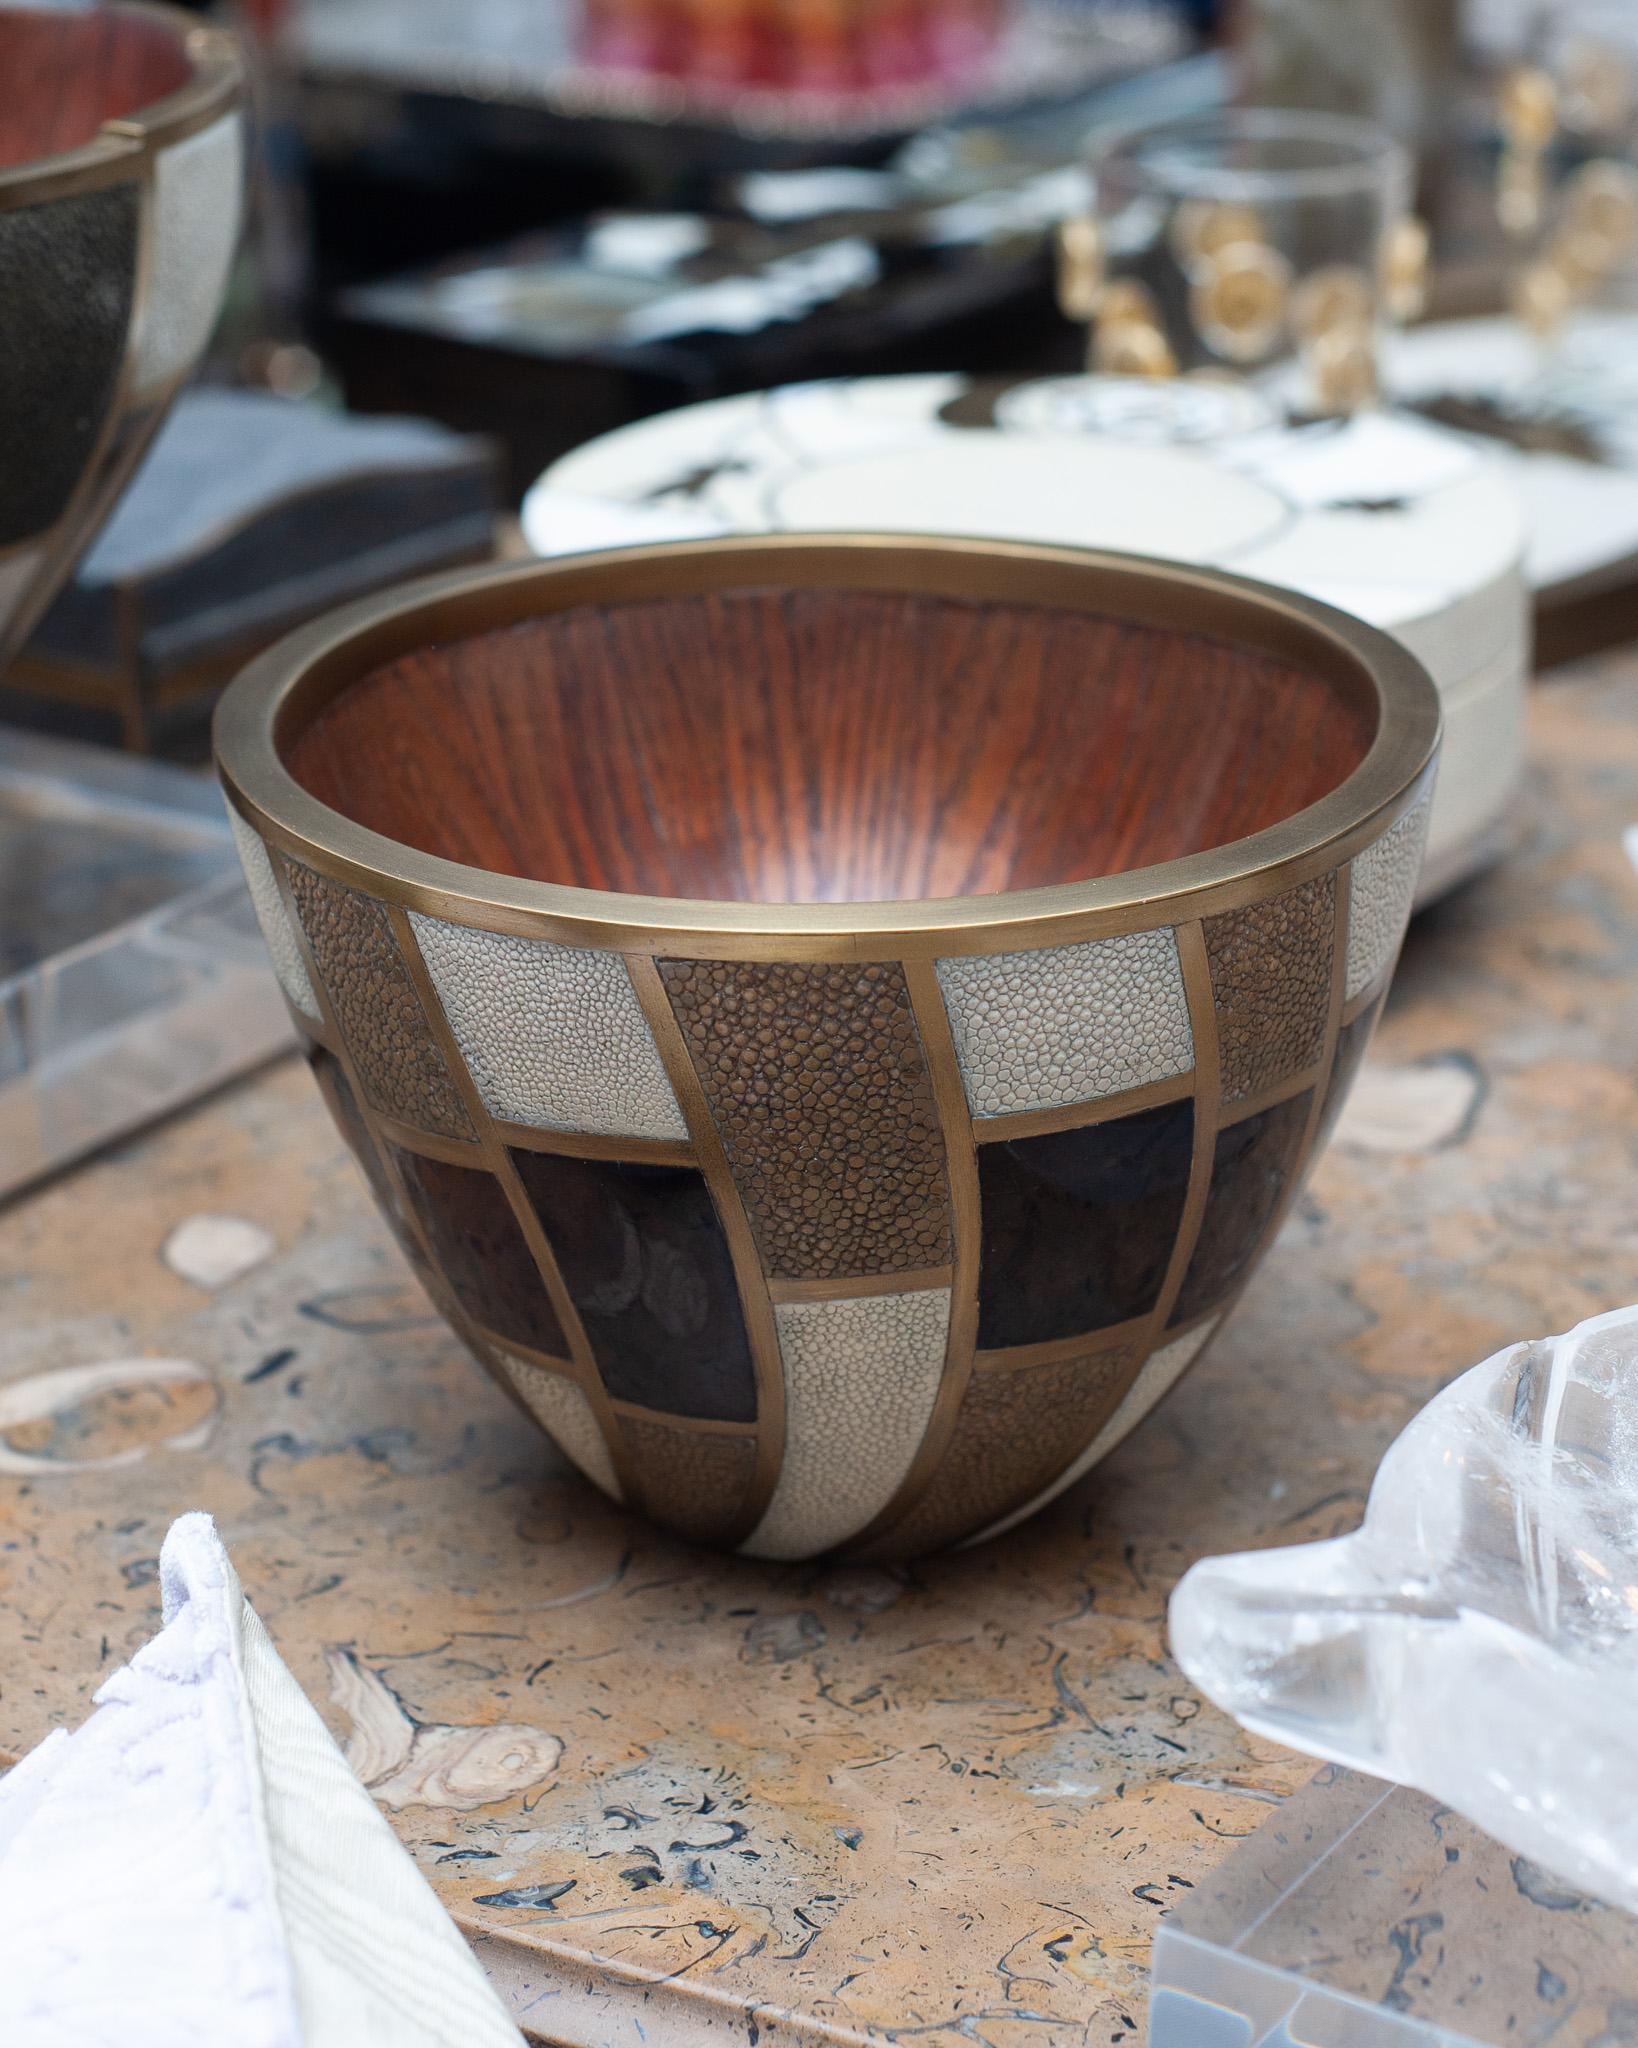 In stock now - A gorgeous walnut bowl made R & Y Augousti, with brass borders inlaid with creme & earth tone shagreen and brown penshell. Expertly crafted, this decorative bowl is a perfect sculptural accessory for any table and is as beautiful as